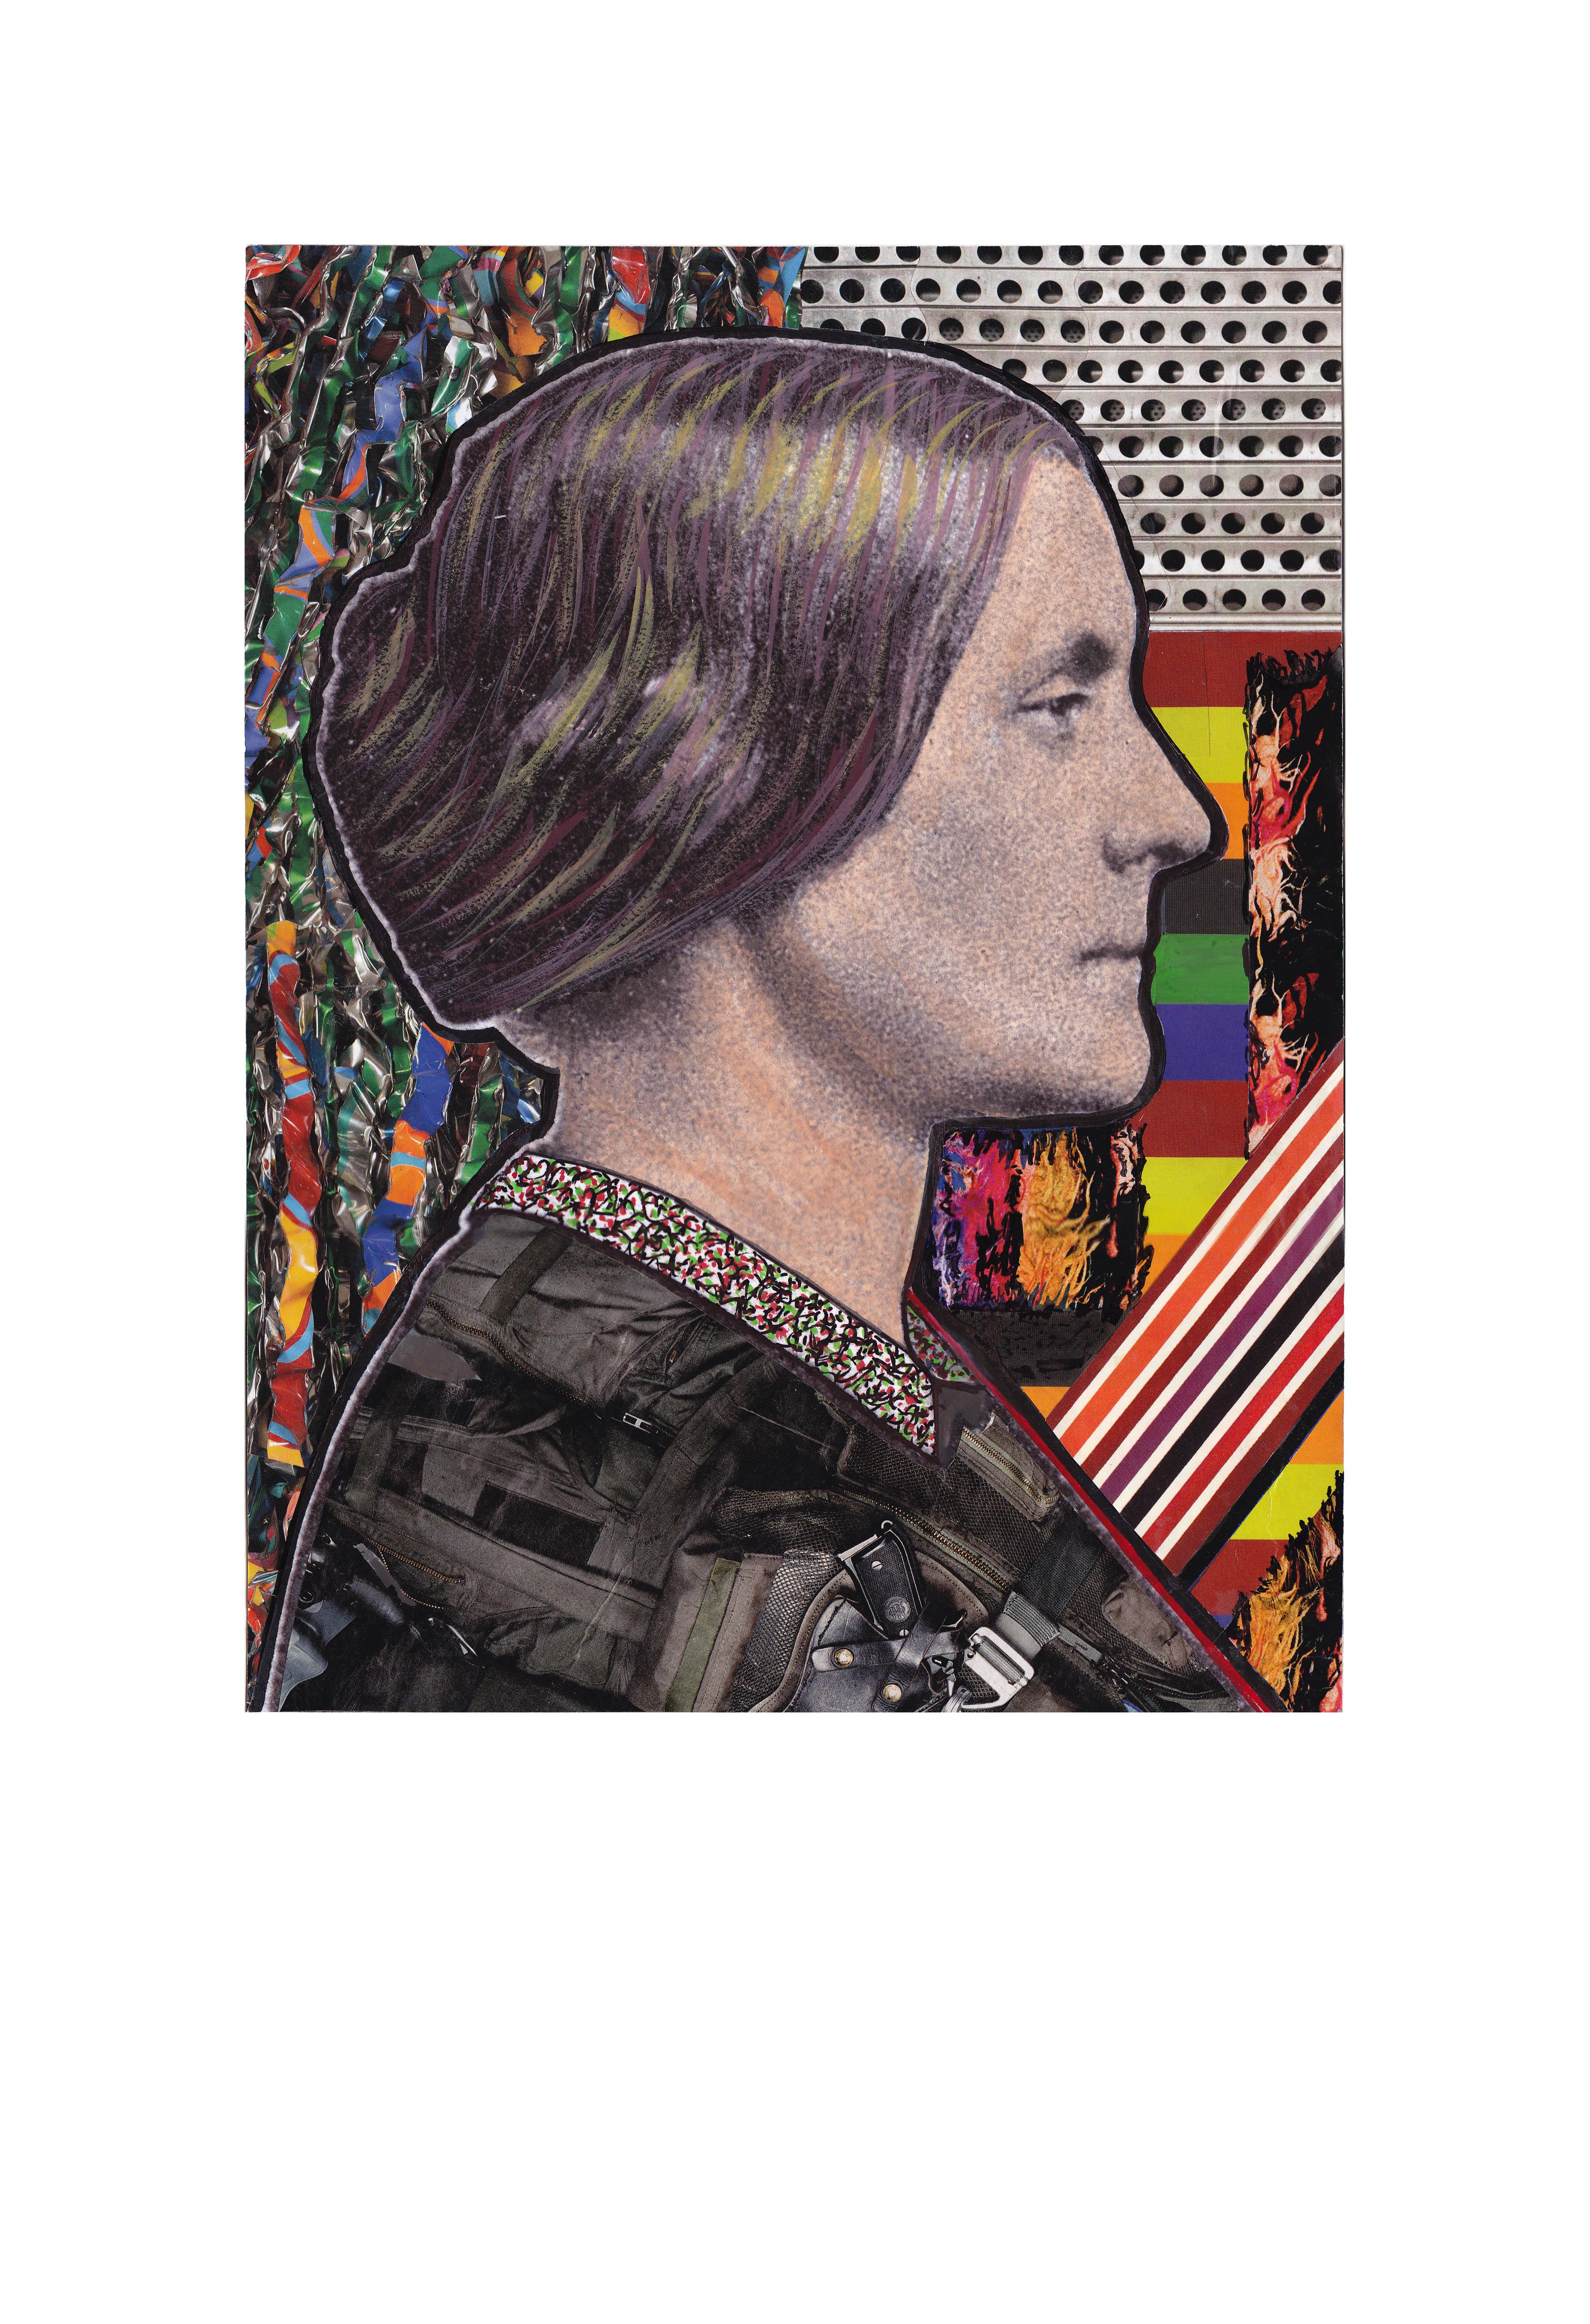 Linda Stein Portrait Print -  Signed Limited Edition Feminist Contemporary Art Print - Susan B. Anthony 786 